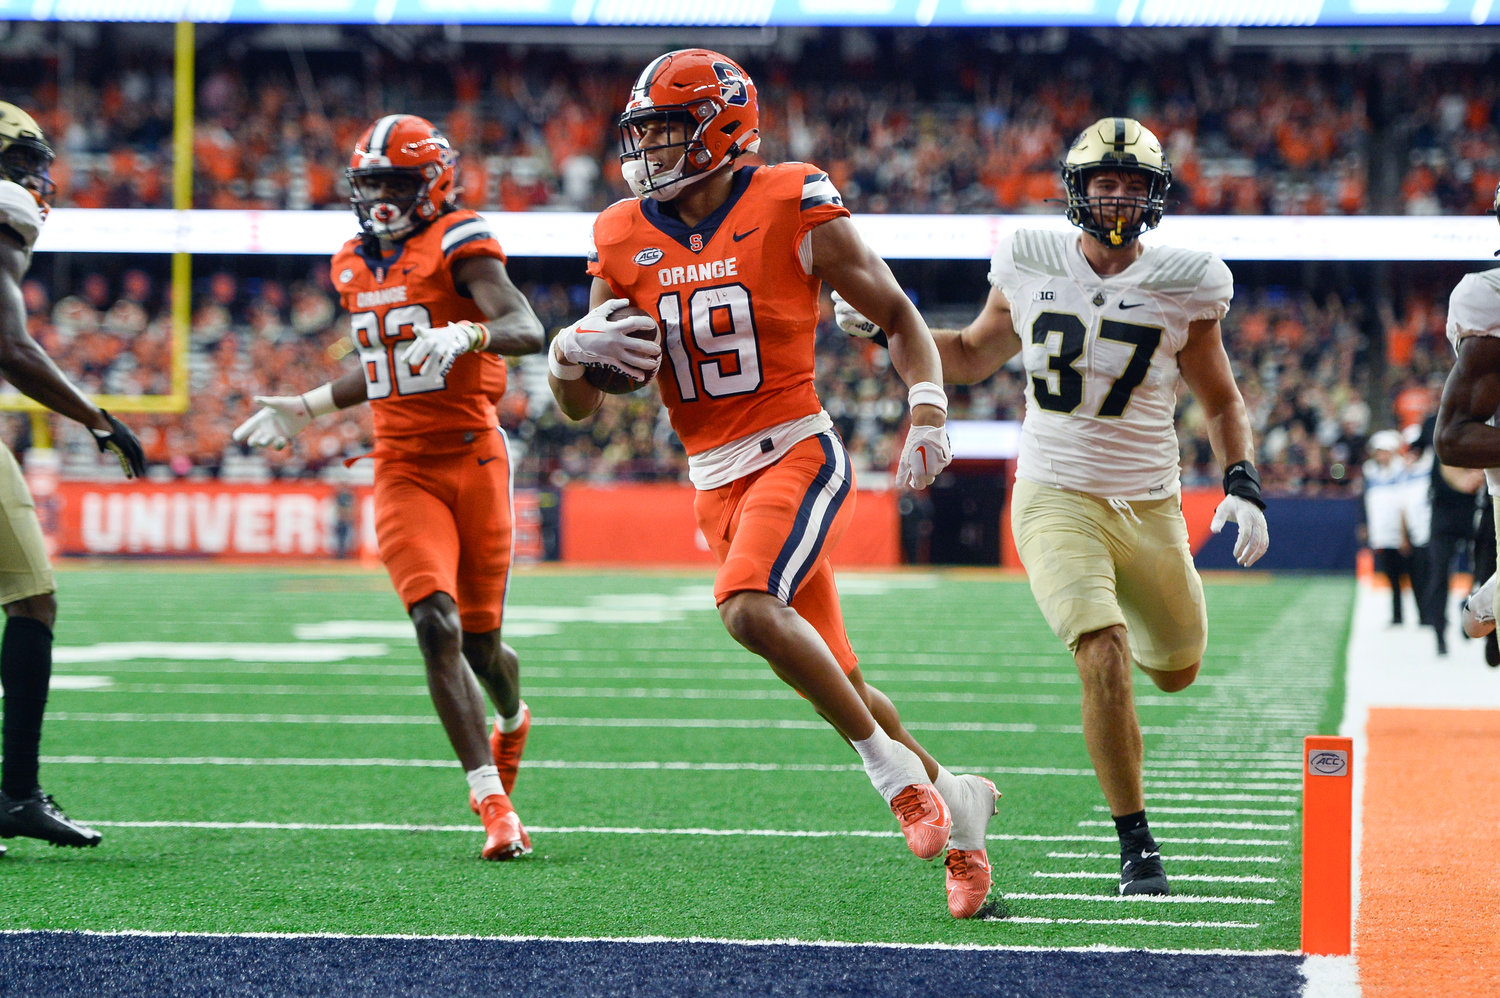 Syracuse wide receiver Oronde Gadsden II, center, scores a touchdown against Purdue during the second half of an NCAA college football game in Syracuse, N.Y., Saturday, Sept. 17, 2022. Syracuse won 32-29.